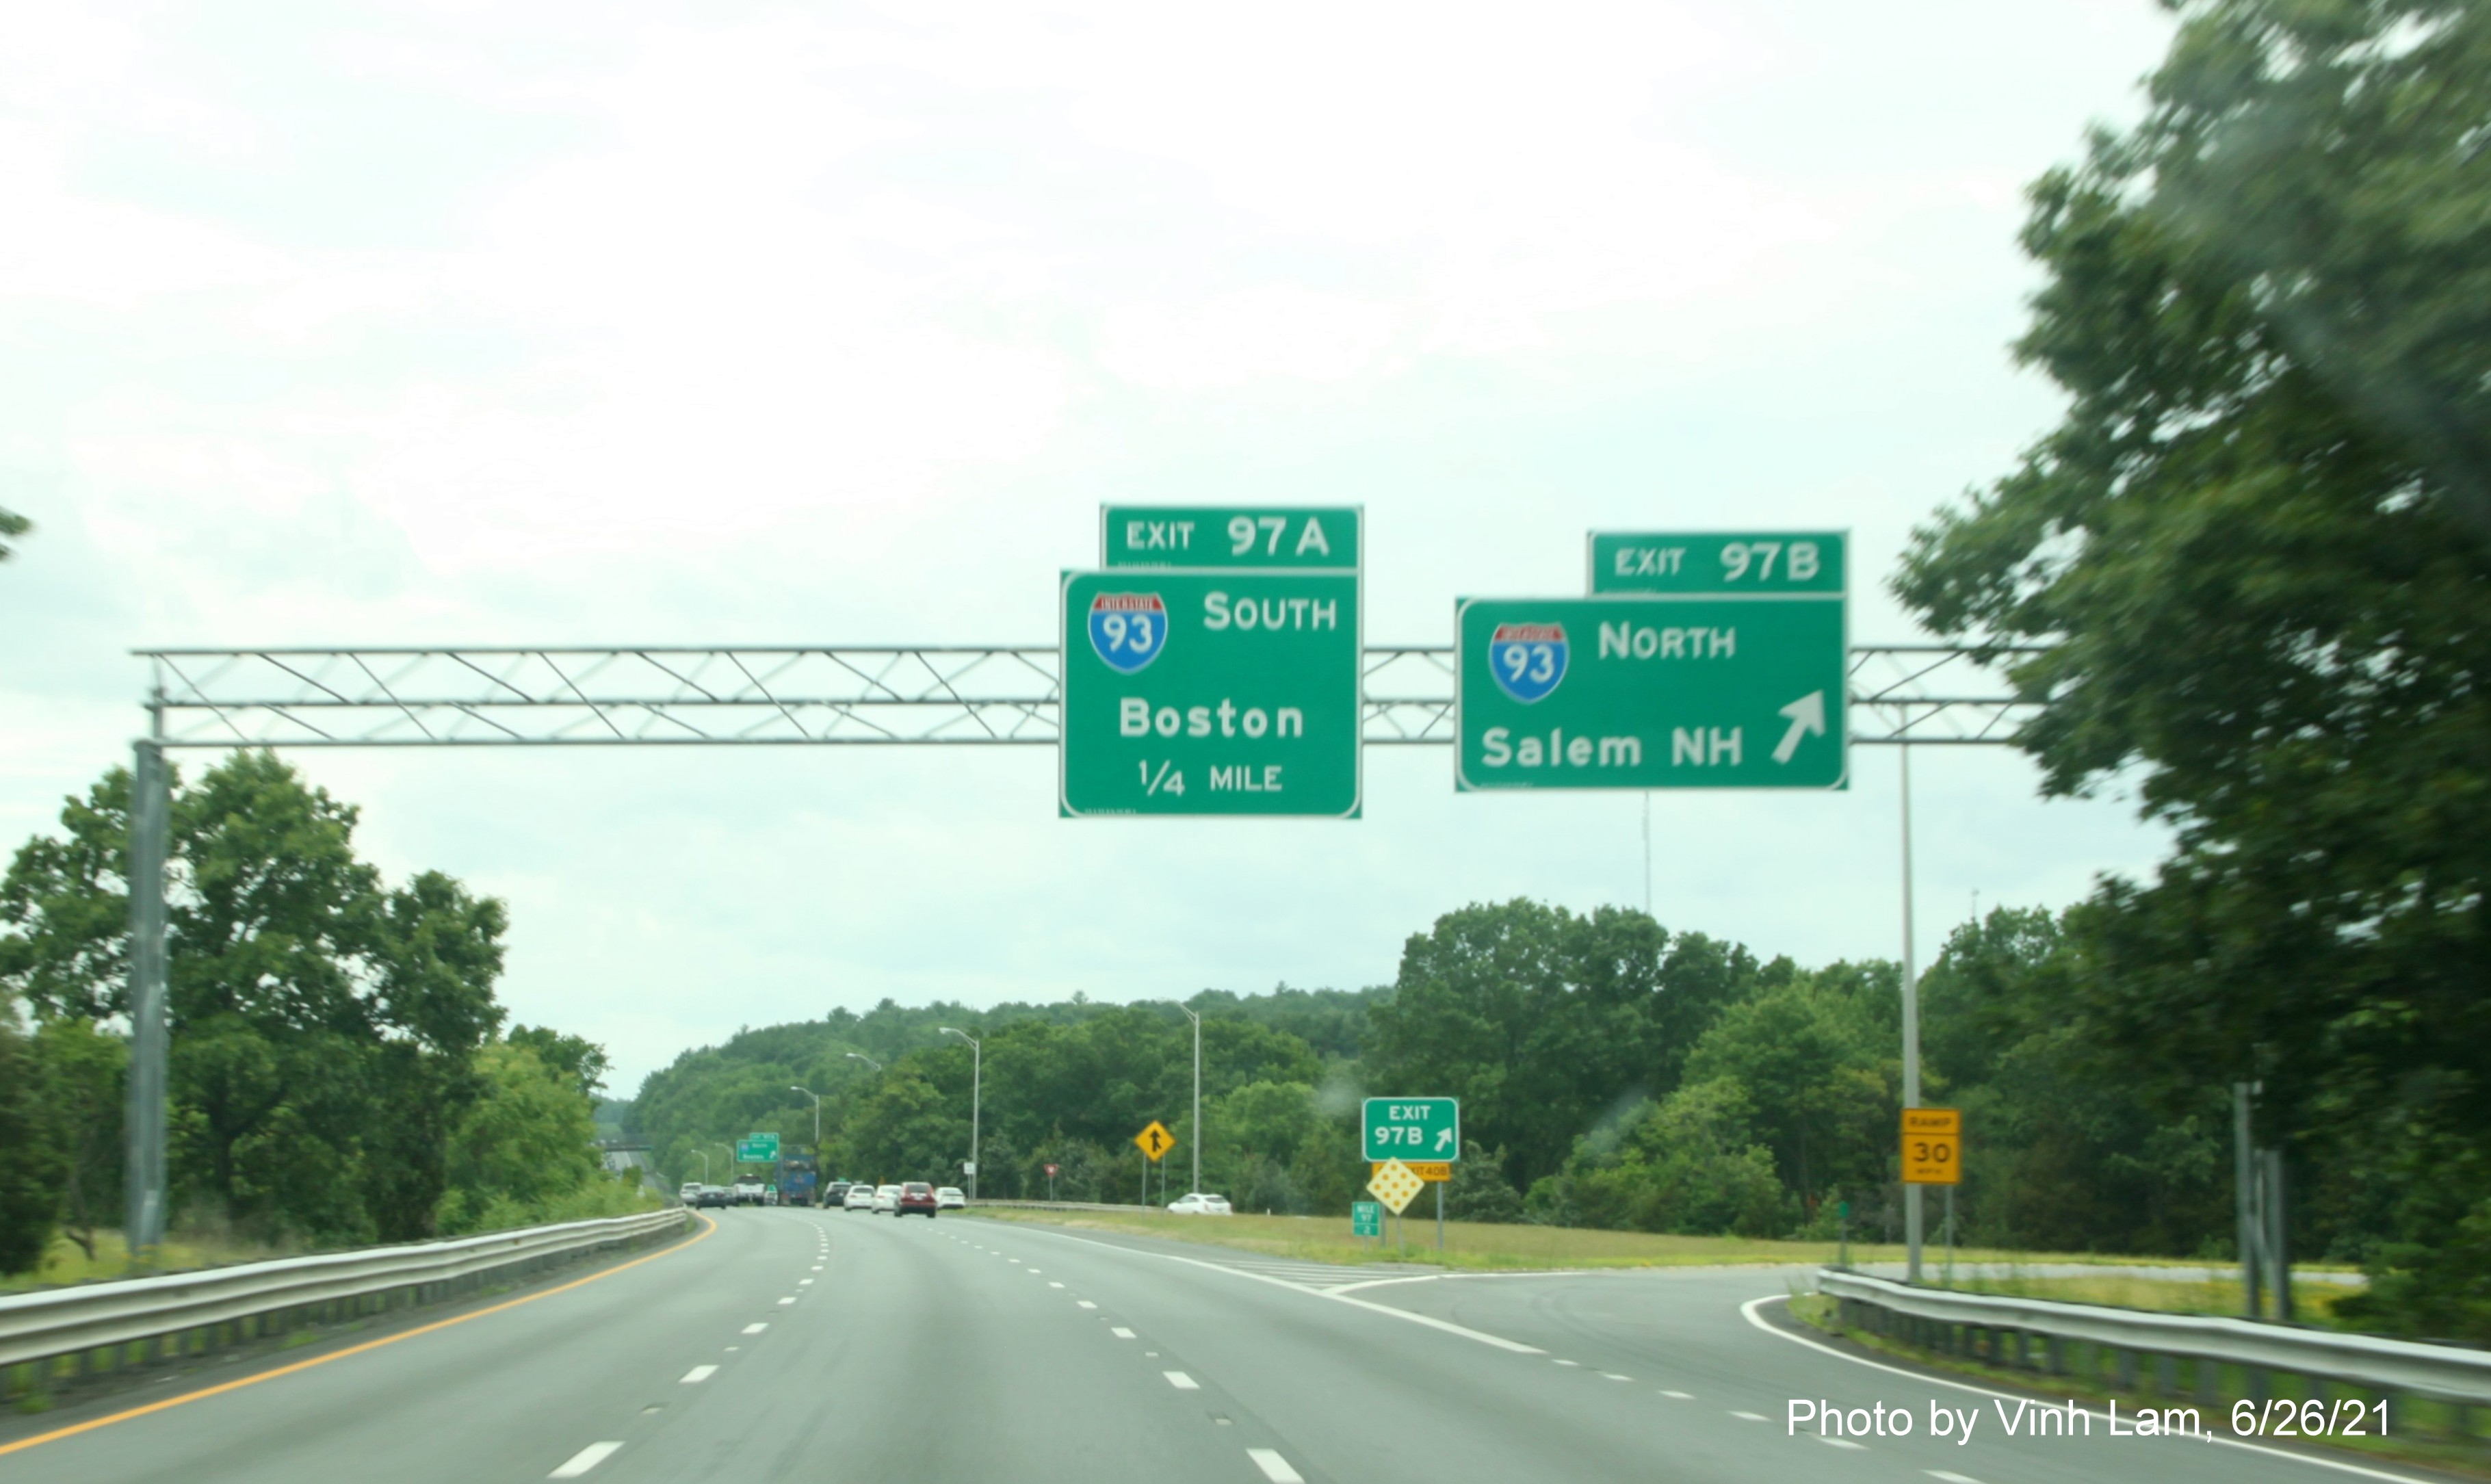 Image of overhead signage at ramp for I-93 North exit with new milepost based exit numbers on I-495 South in Andover, by Vinh Lam, June 2021